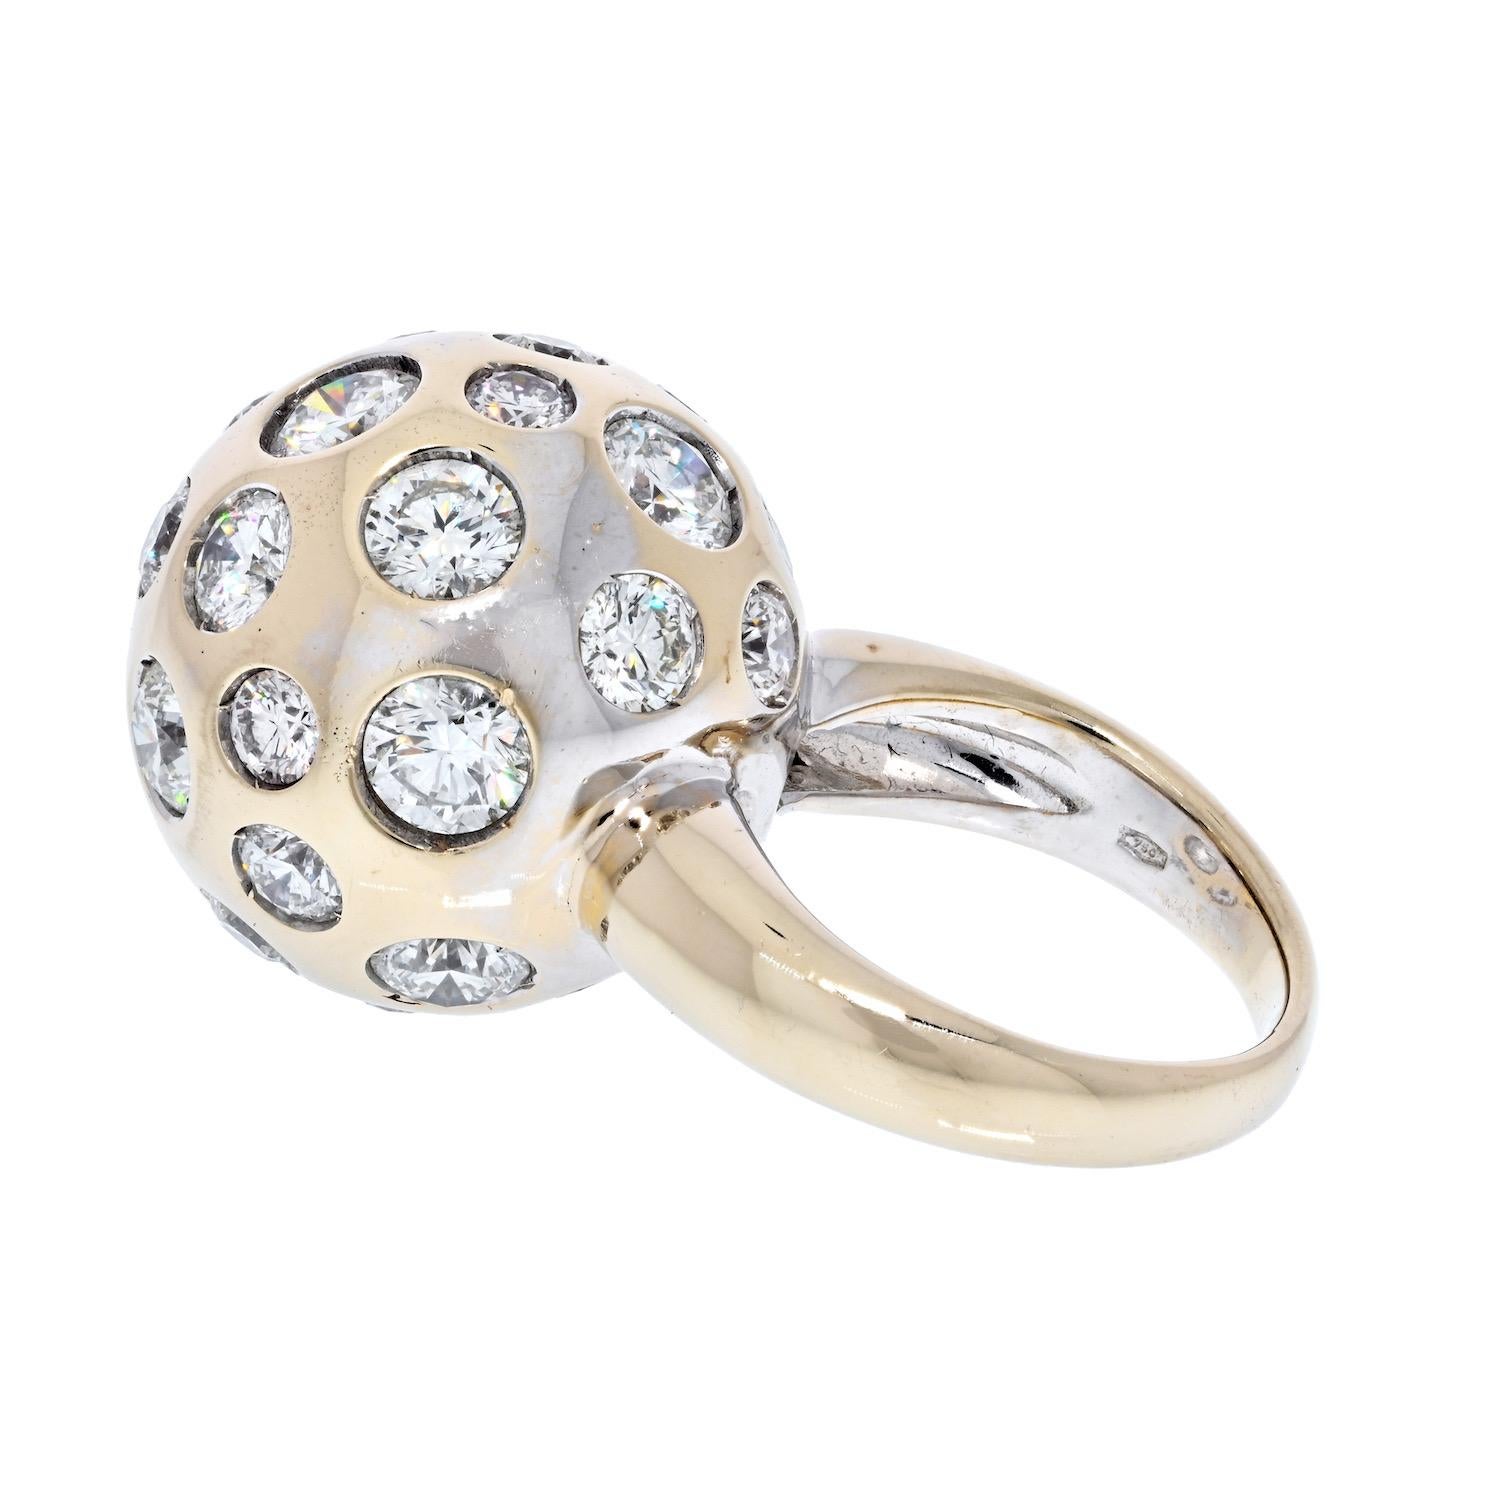 This fun and contemporary ring is a perfect go to piece when strolling around town. Burnish set diamonds are mounted secure and with no support of any prongs, it will never scartch your finger or catch on clothes. 
This ring has a fun design idea,